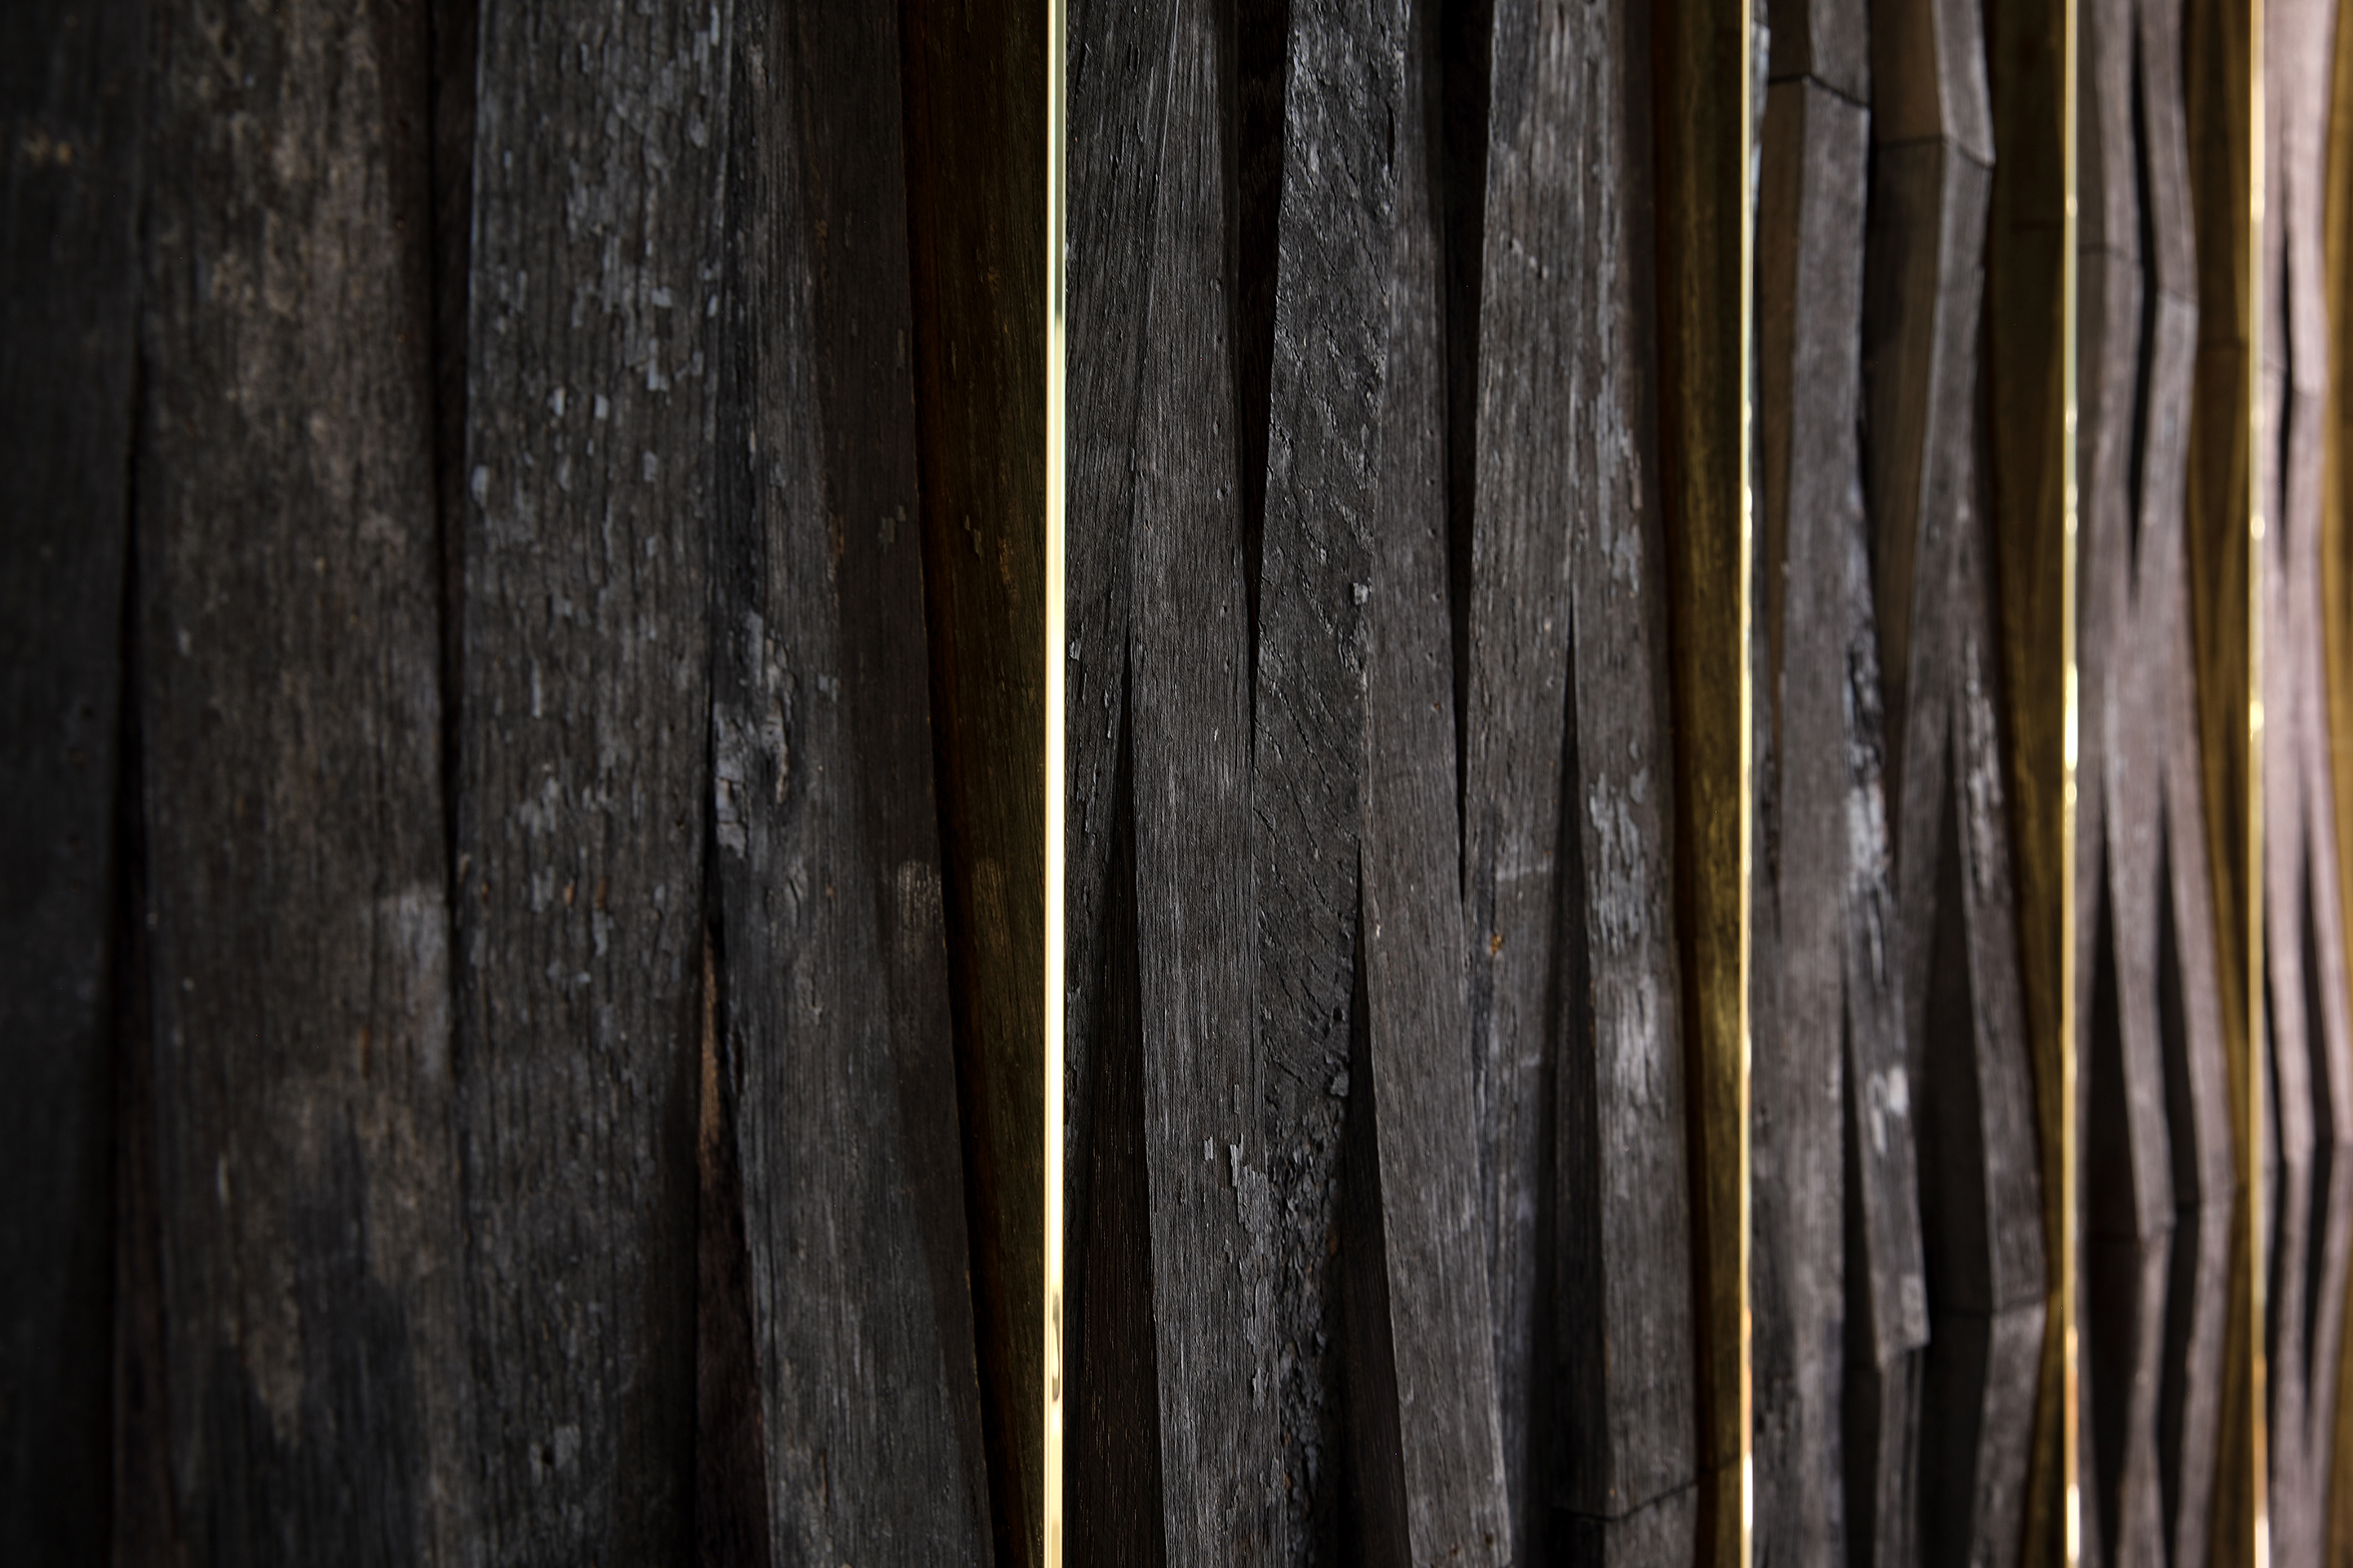 Original charred barrel staves (complete with the authentic aroma of fermented whisky) were shipped from a cooperage in Scotland to clad the walls.